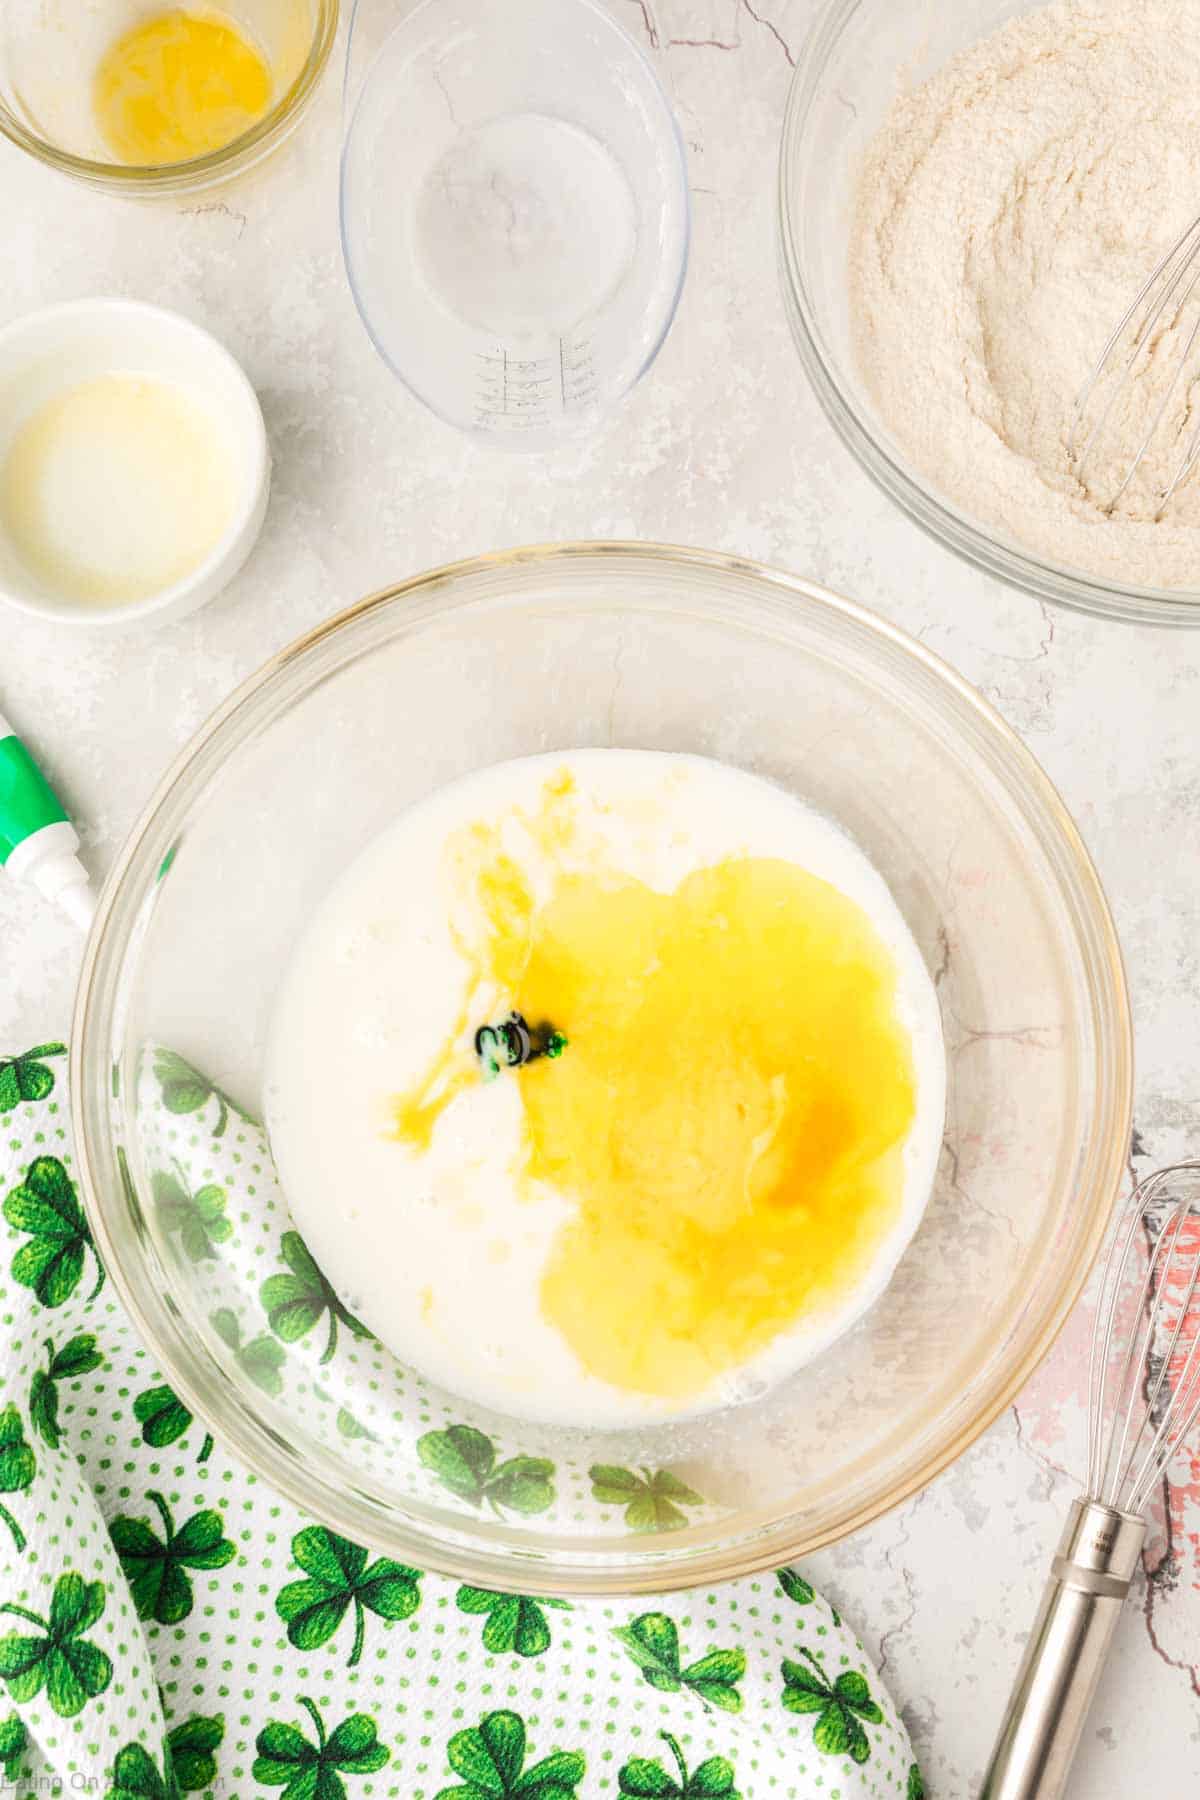 Combining the buttermilk, egg, butter, and green food coloring